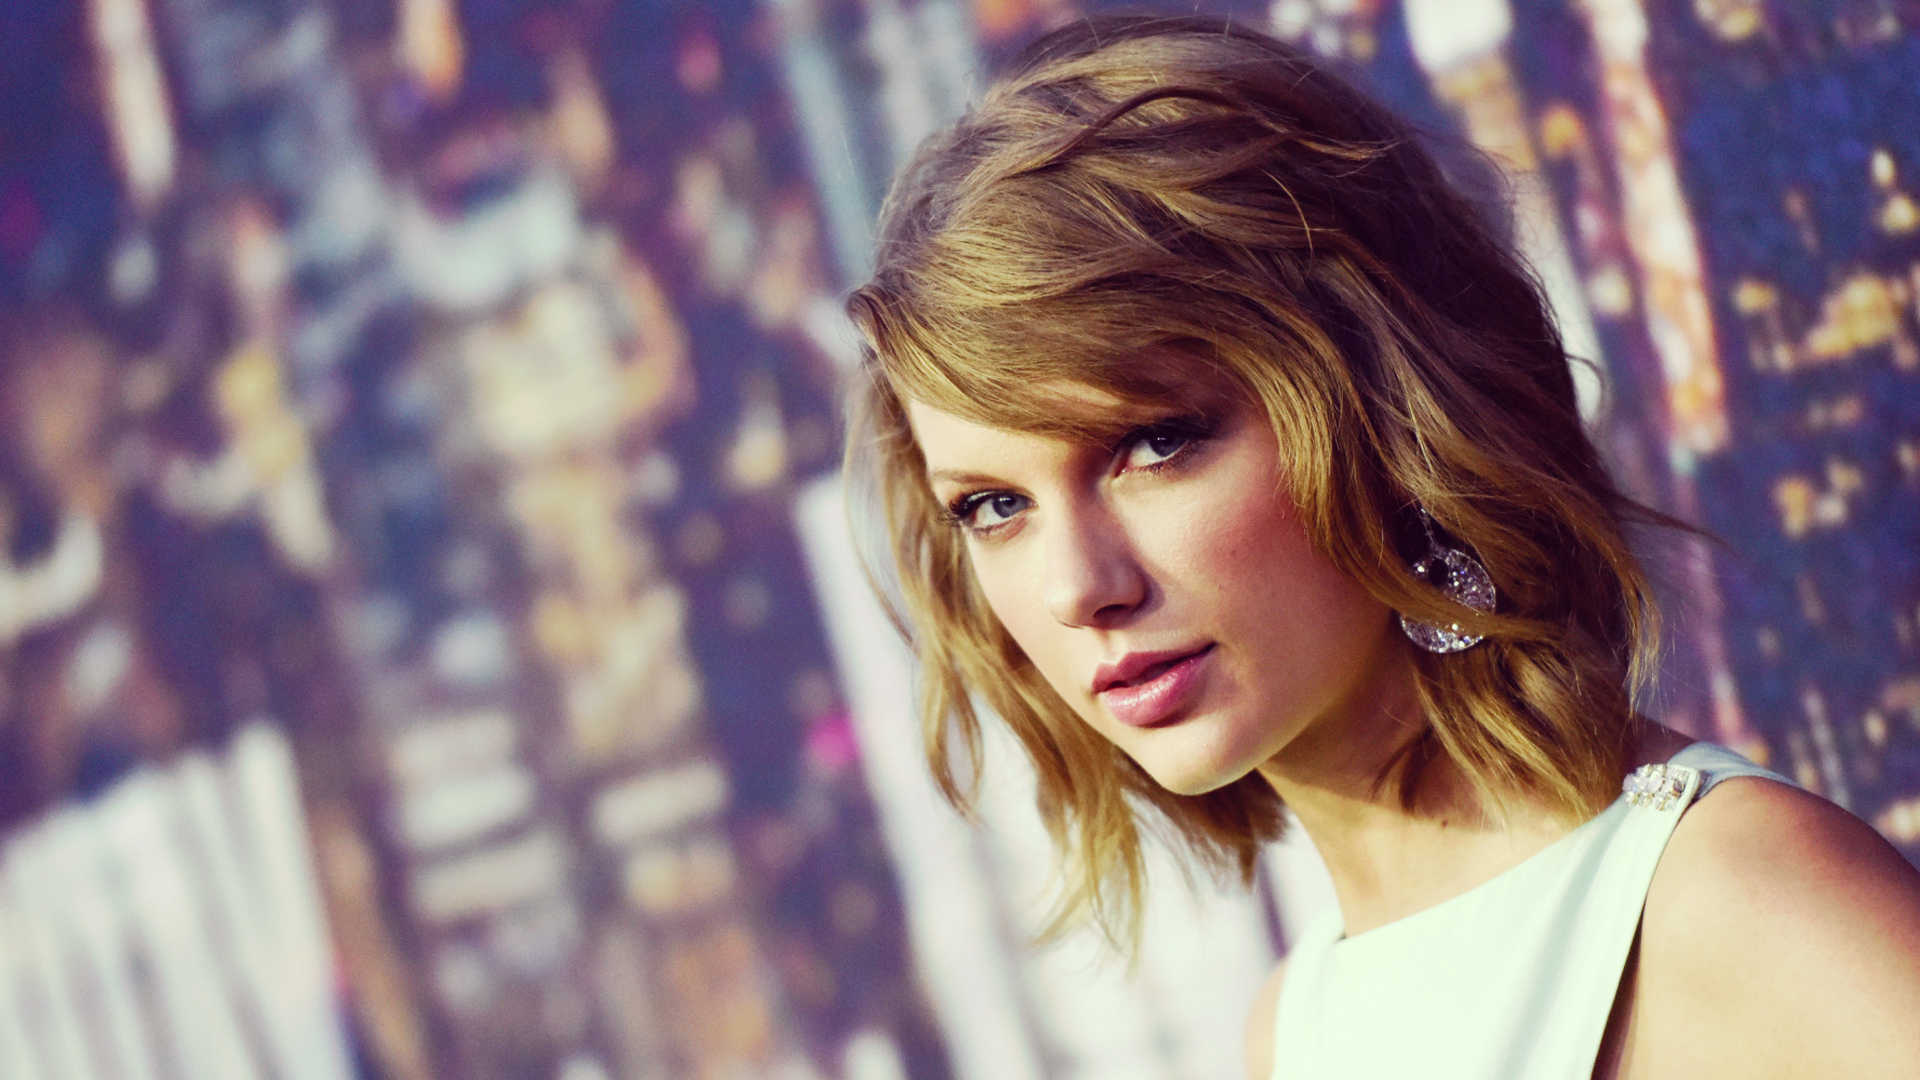 Taylor Swift 1989 Computer Wallpaper in 2023  Taylor swift wallpaper Taylor  swift Wallpaper notebook